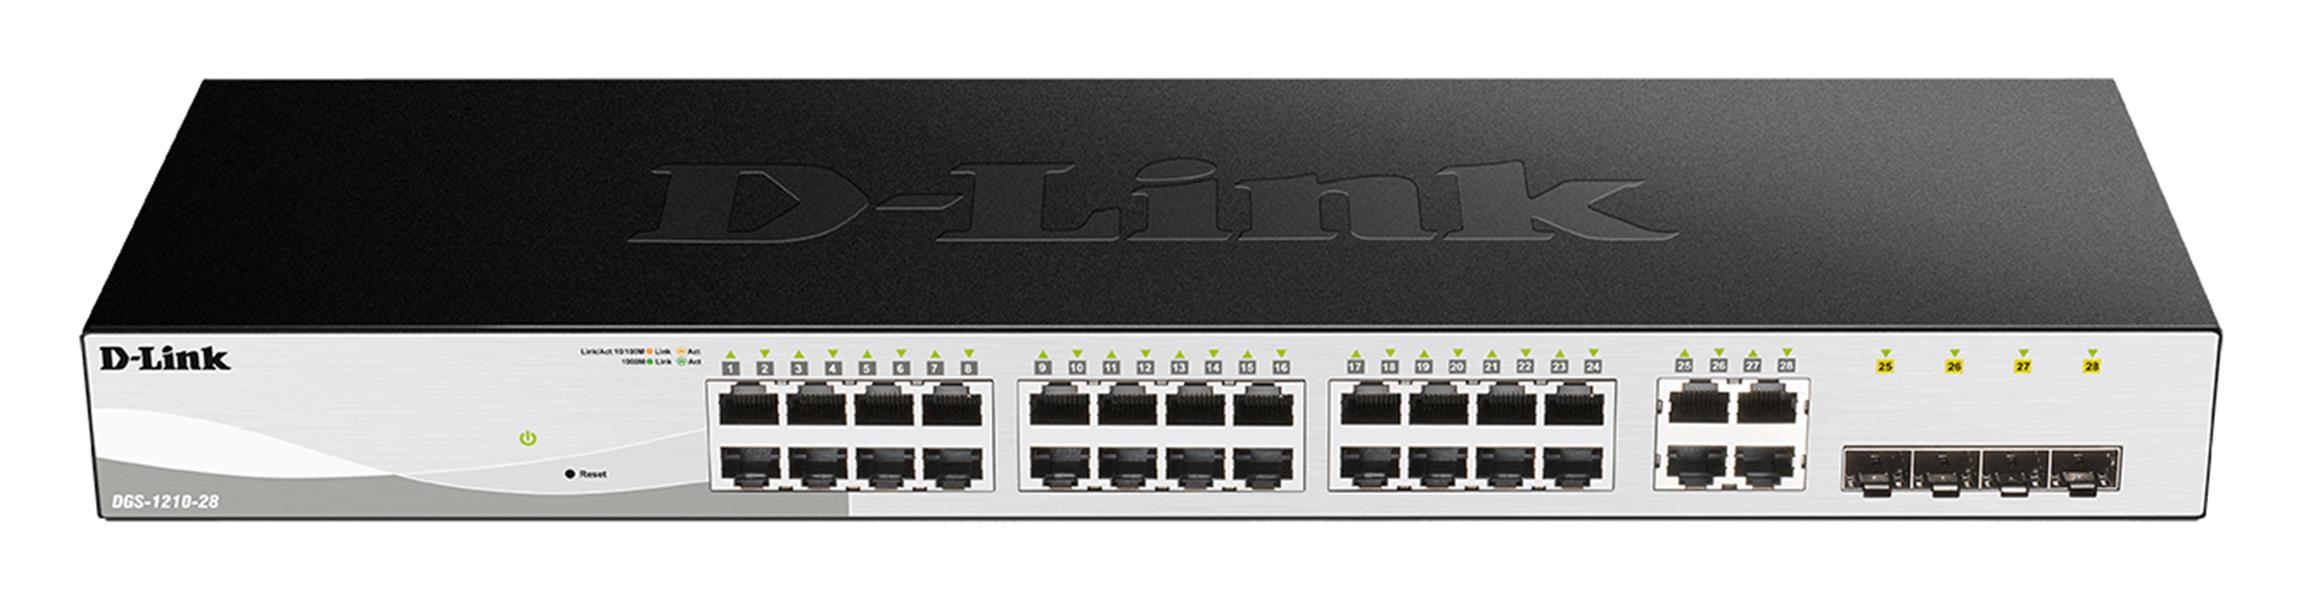 24 10 100 1000 Base-T port with 4 x 1000Base-T SFP ports